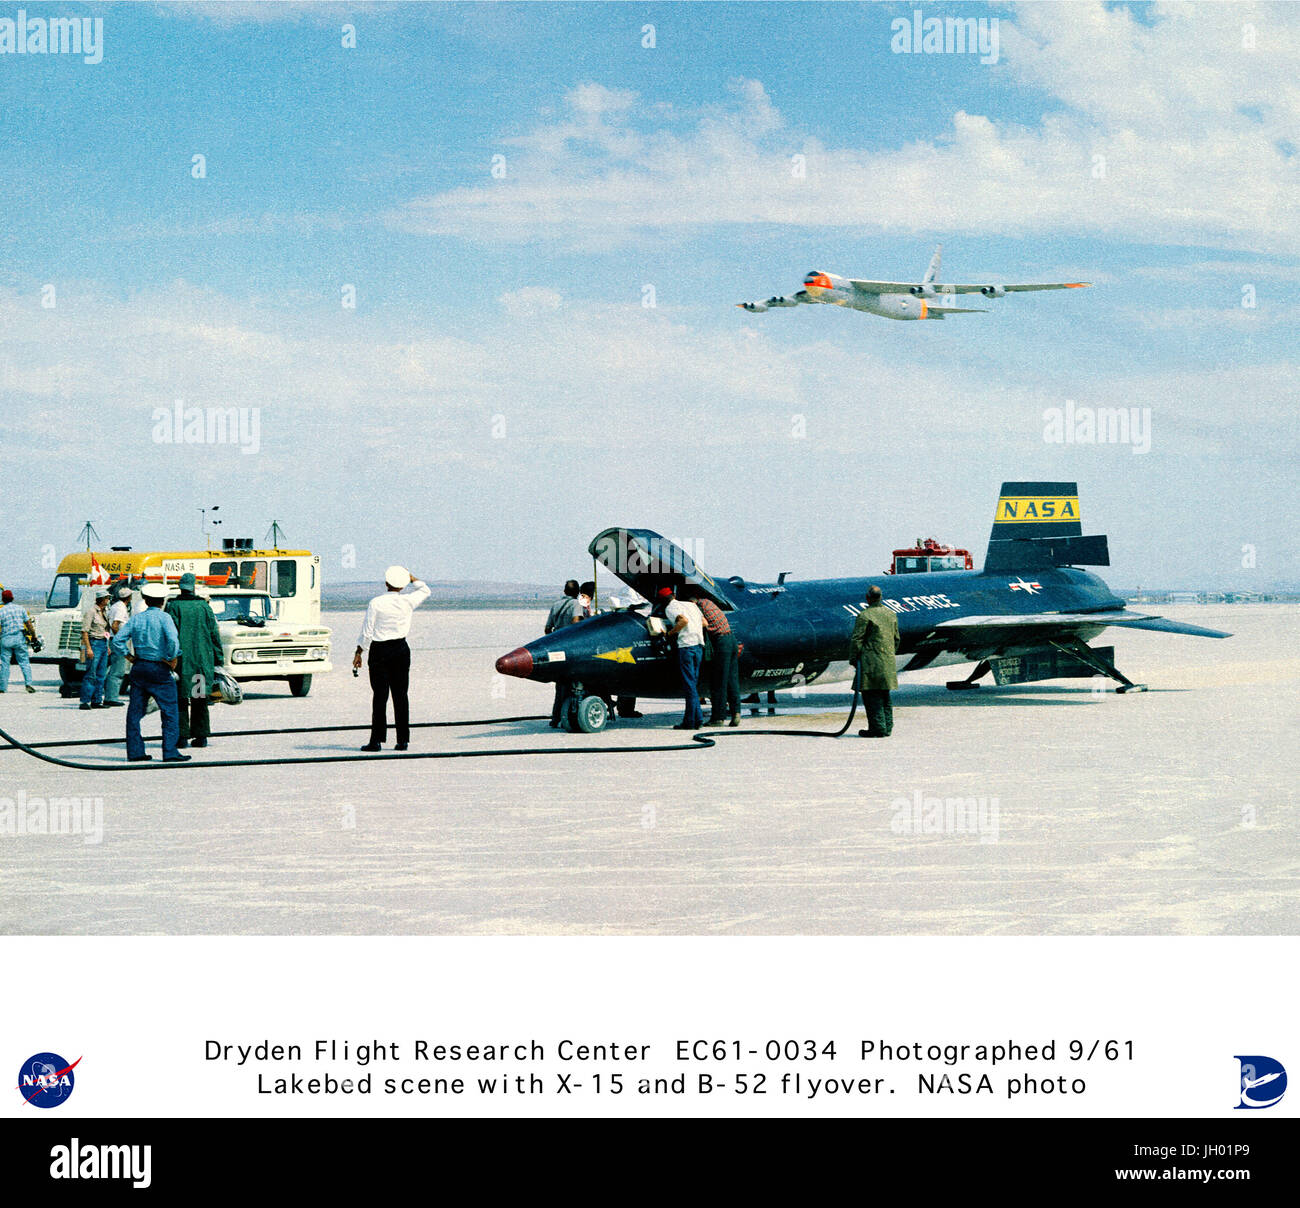 As crew members secure the X-15 rocket-powered aircraft after a research flight, the B-52 mothership used for launching this unique aircraft does a low fly-by overhead. The X-15s made a total of 199 flights over a period of nearly 10 years -- 1959 to 1968 -- and set unofficial world speed and altitude records of 4,520 mph (Mach 6.7) and 354,200. Information gained from the highly successful X-15 program contributed to the development of the Mercury, Gemini, and Apollo piloted spaceflight programs, and also the Space Shuttle program. Stock Photo